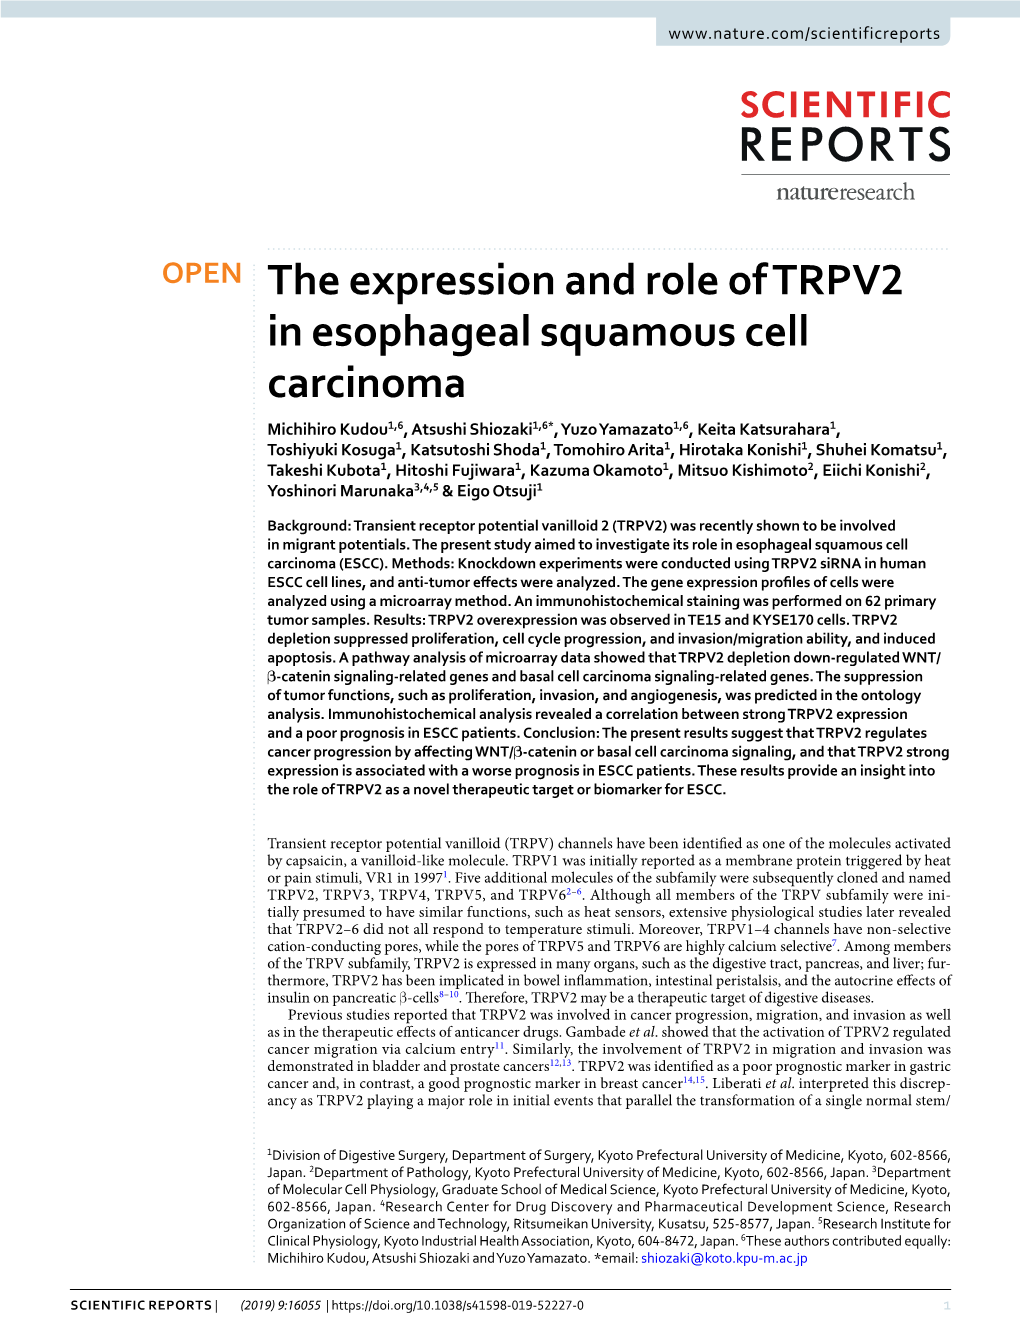 The Expression and Role of TRPV2 in Esophageal Squamous Cell Carcinoma